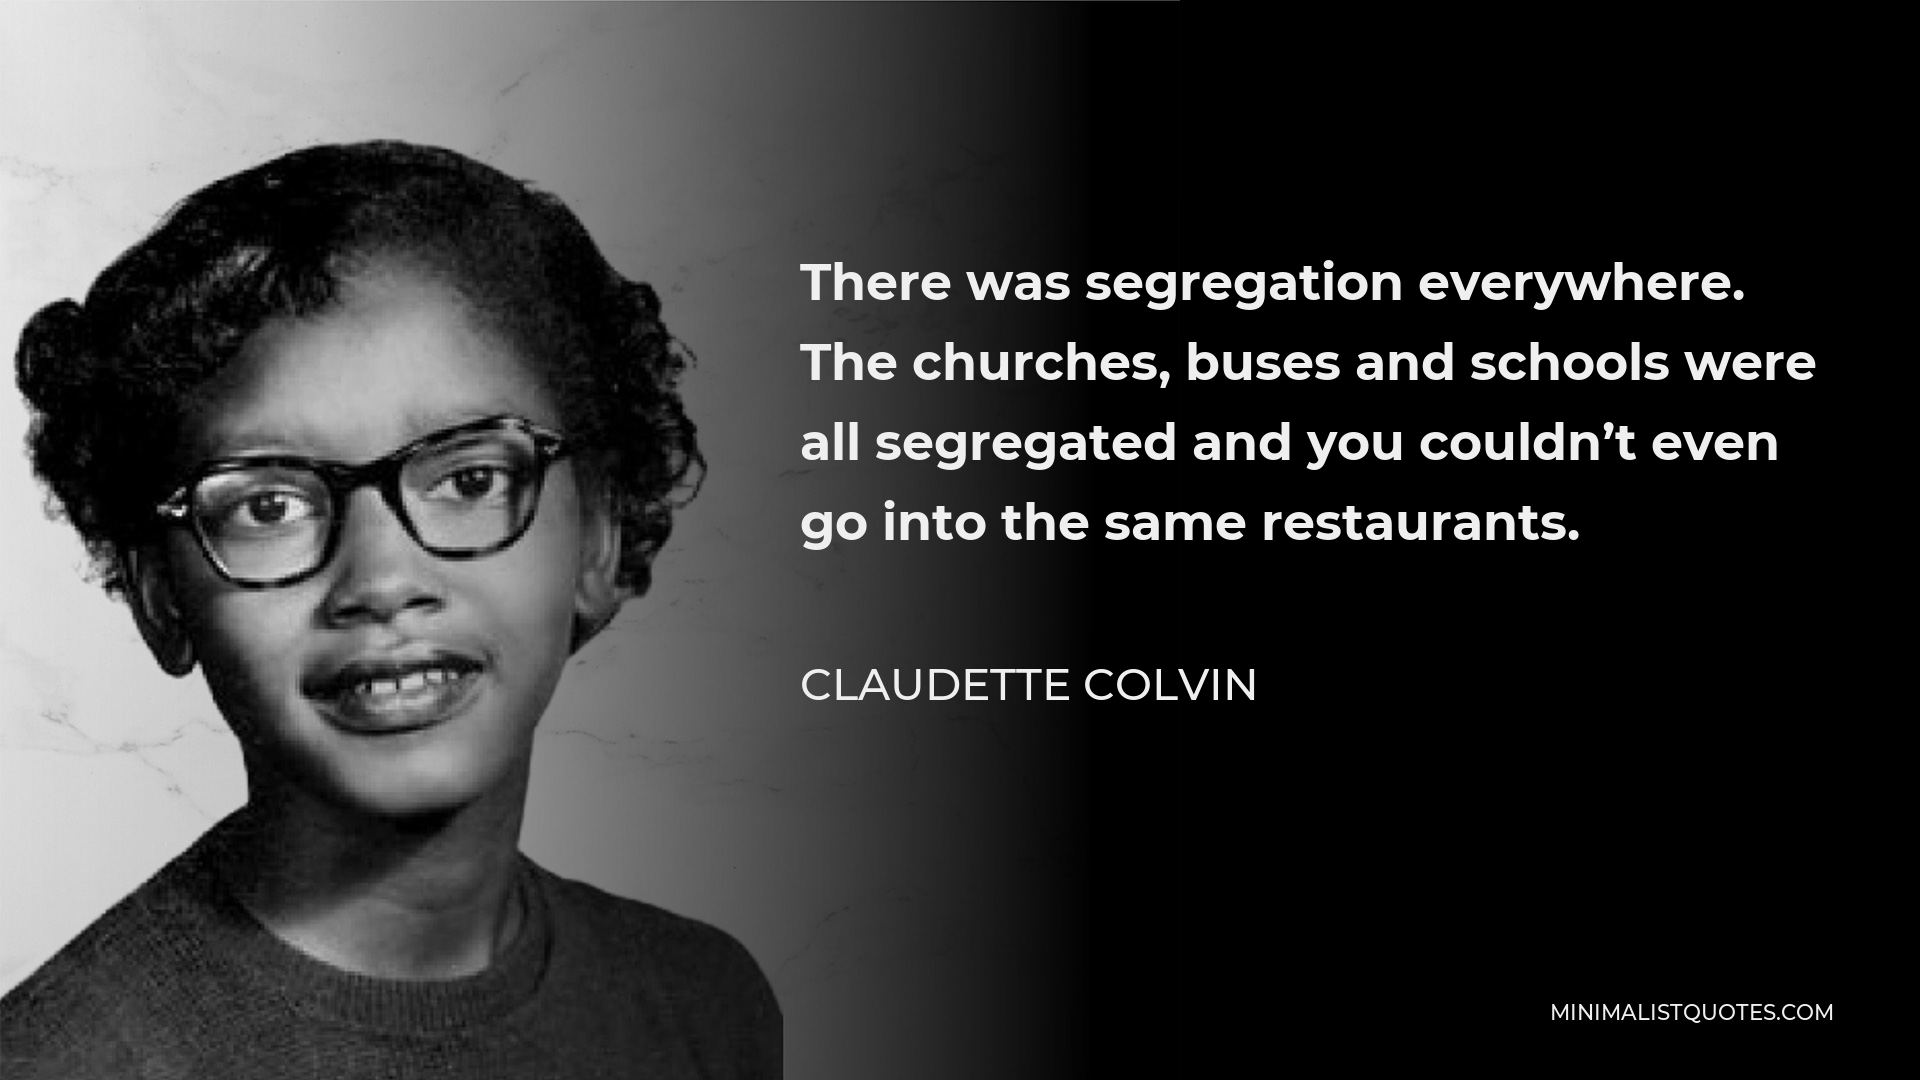 Claudette Colvin Quote - There was segregation everywhere. The churches, buses and schools were all segregated and you couldn’t even go into the same restaurants.